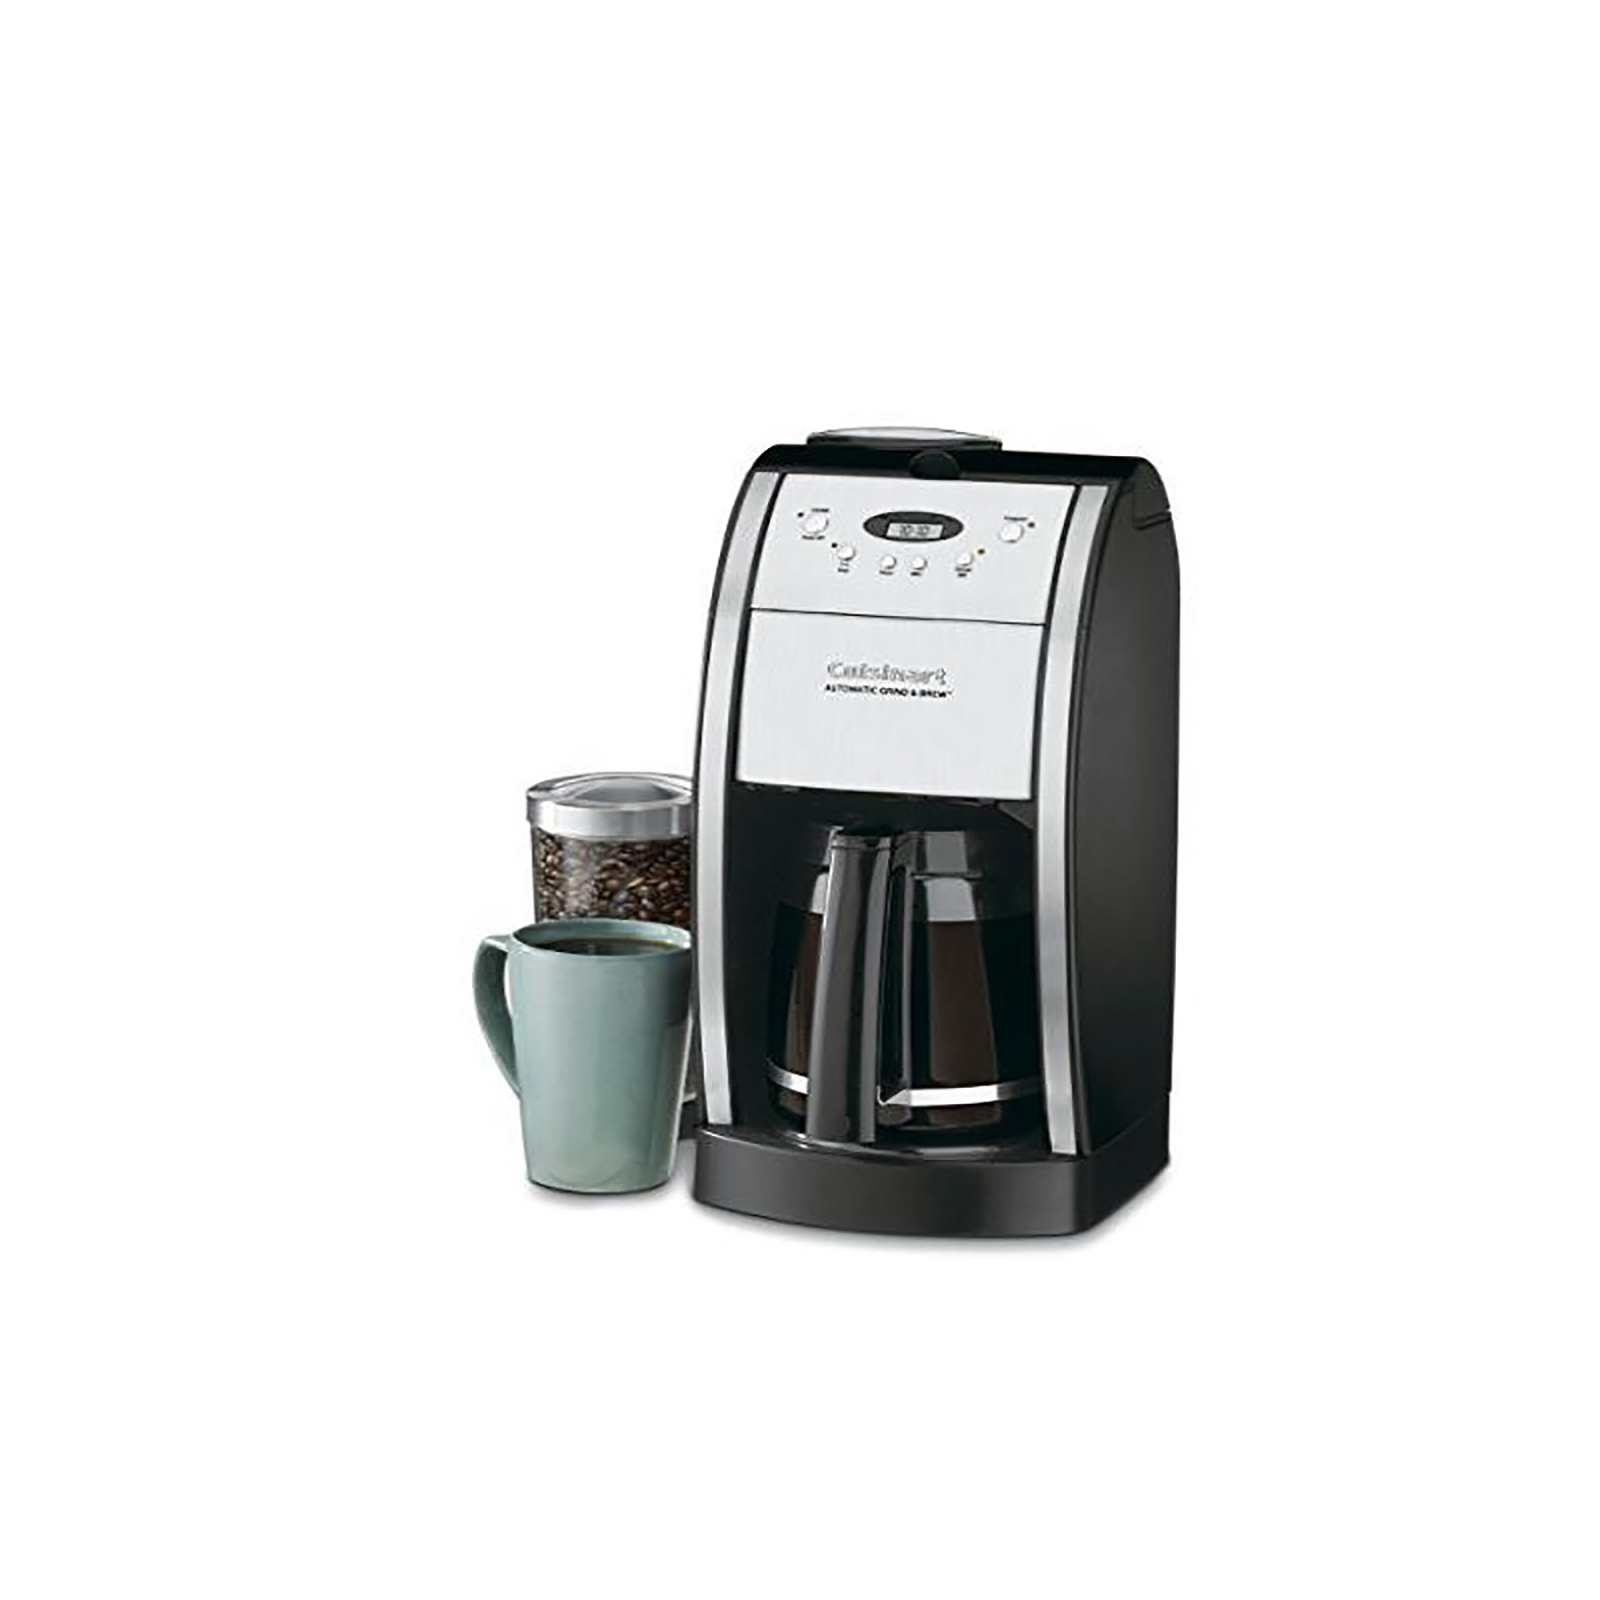 Cuisinart DGB-550BK Grind and Brew 12-cup Automatic Coffeemaker - Black